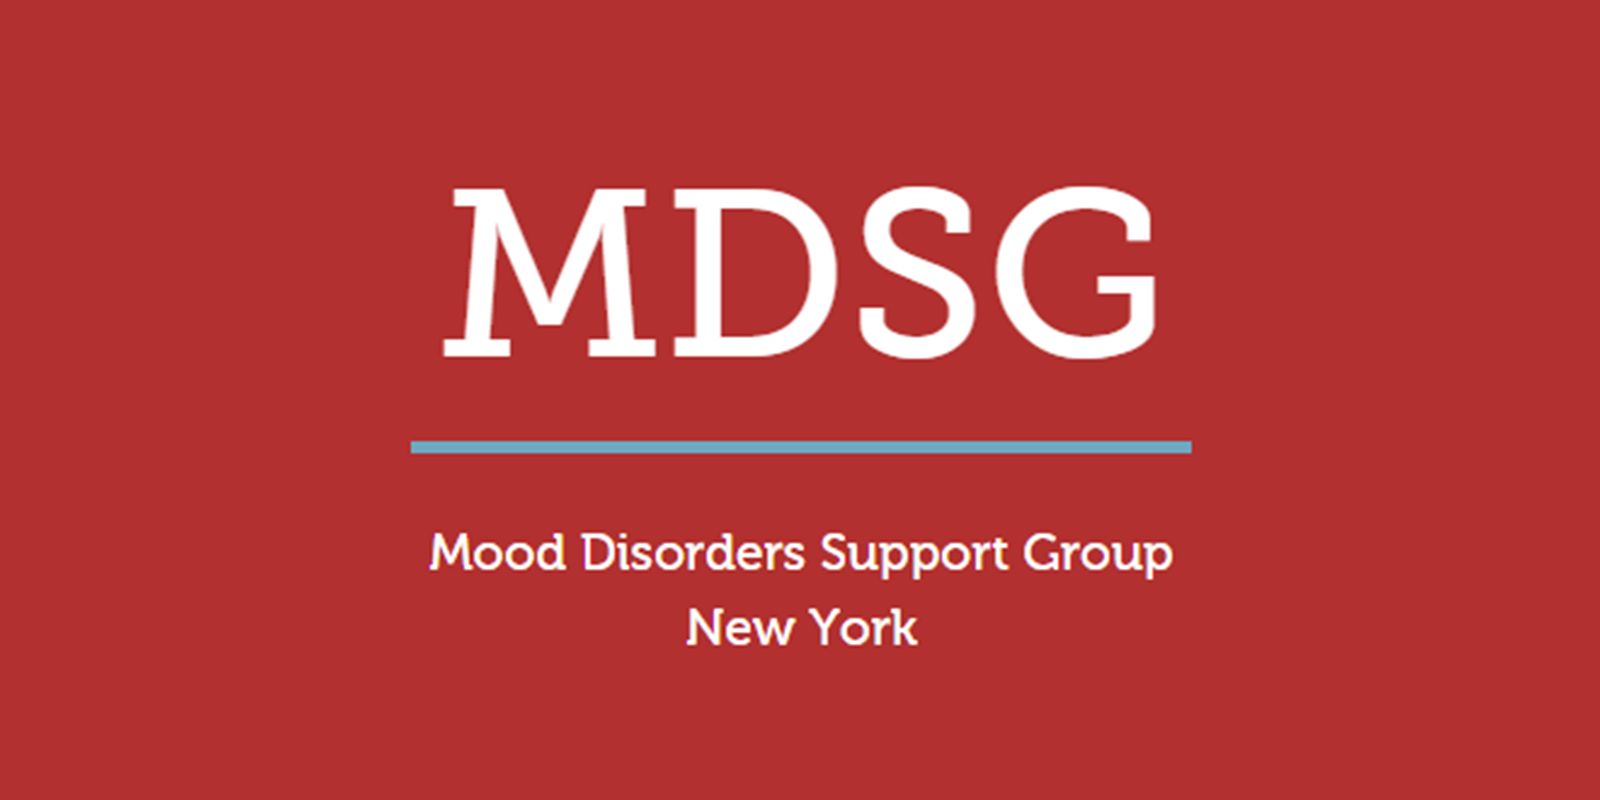 PEER SUPPORT: MDSG (Mood Disorders Support Group) NYC